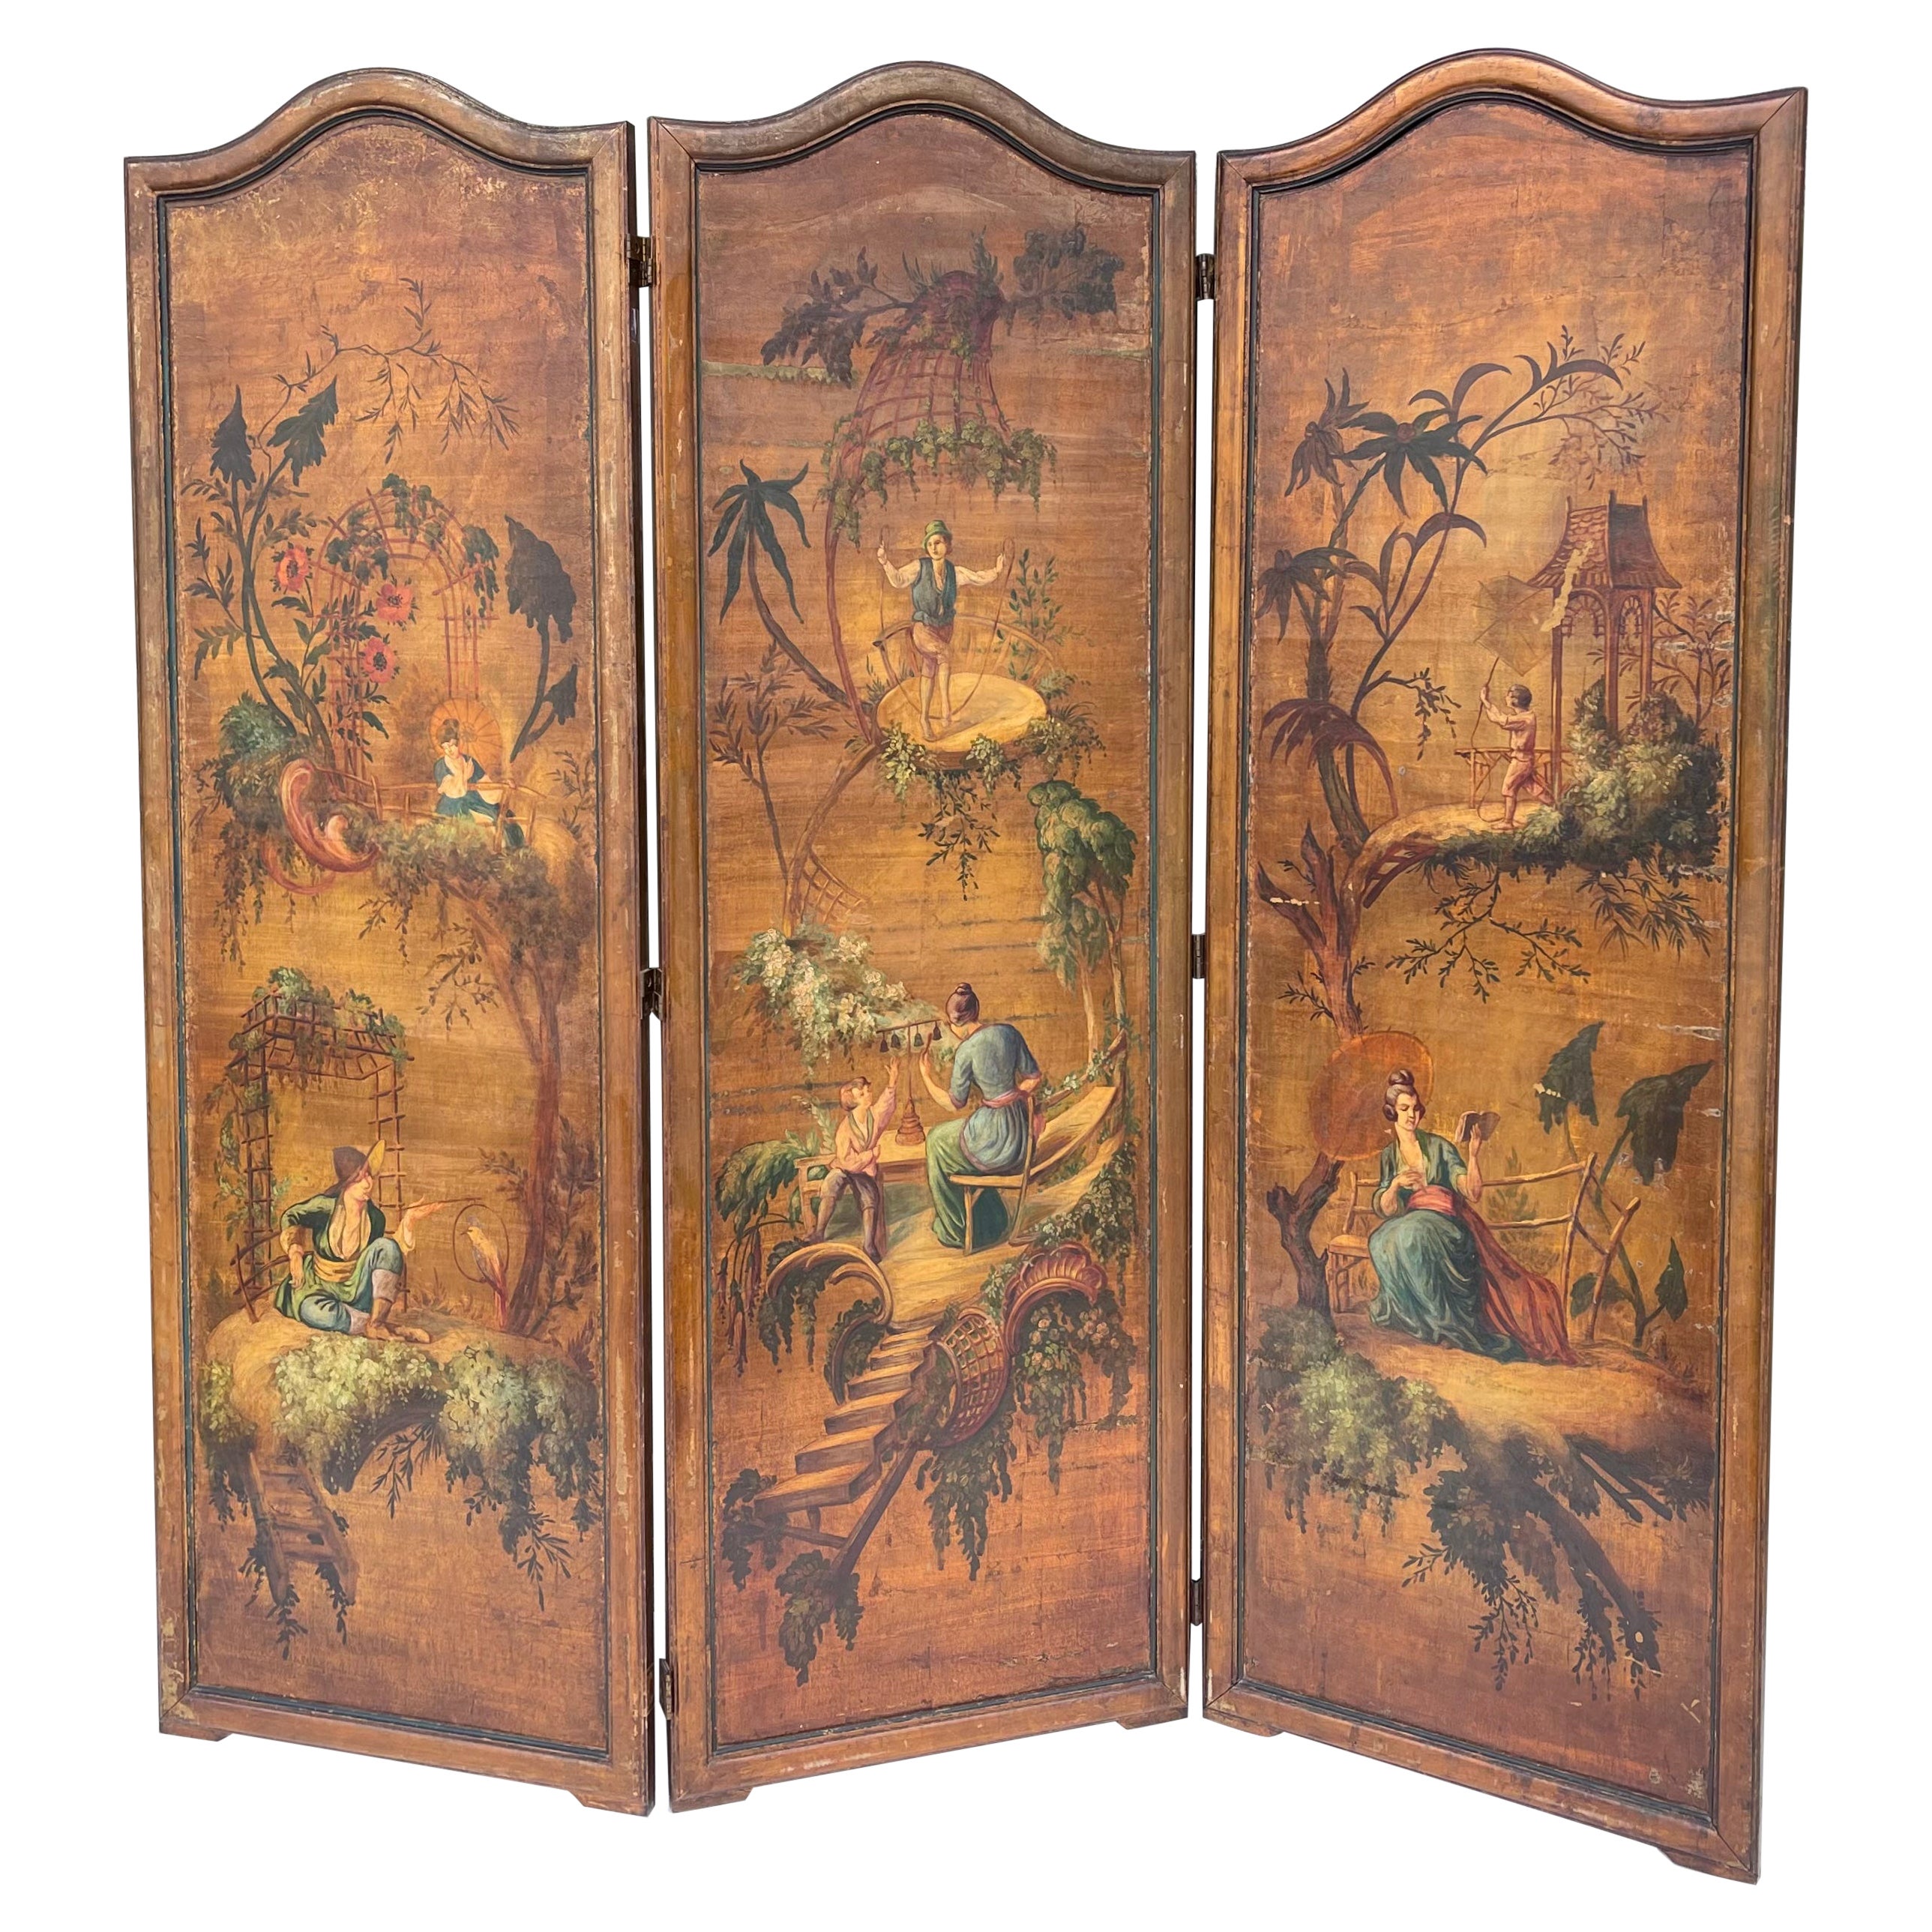 Early 20th-C. Hand Painted French Chinoiserie Oil On Canvas Screen - 3 Panels 